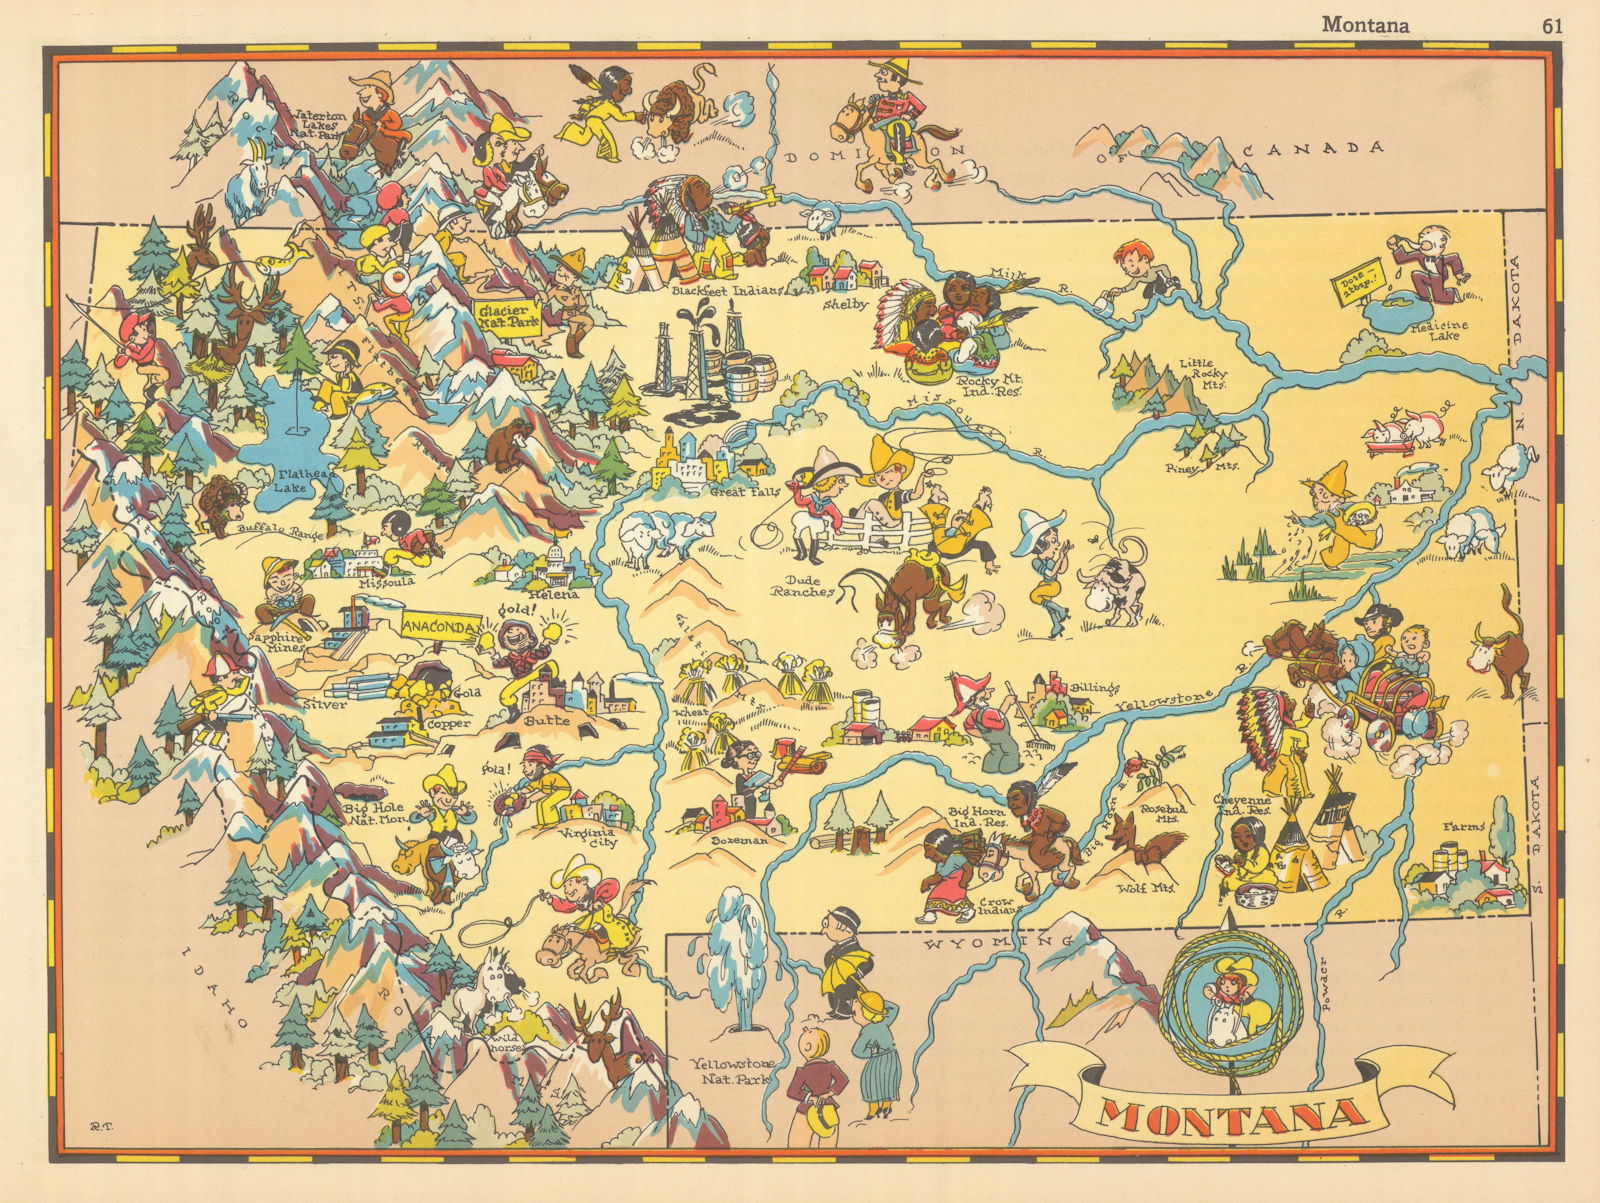 Associate Product Montana. Pictorial state map by Ruth Taylor White 1935 old vintage chart